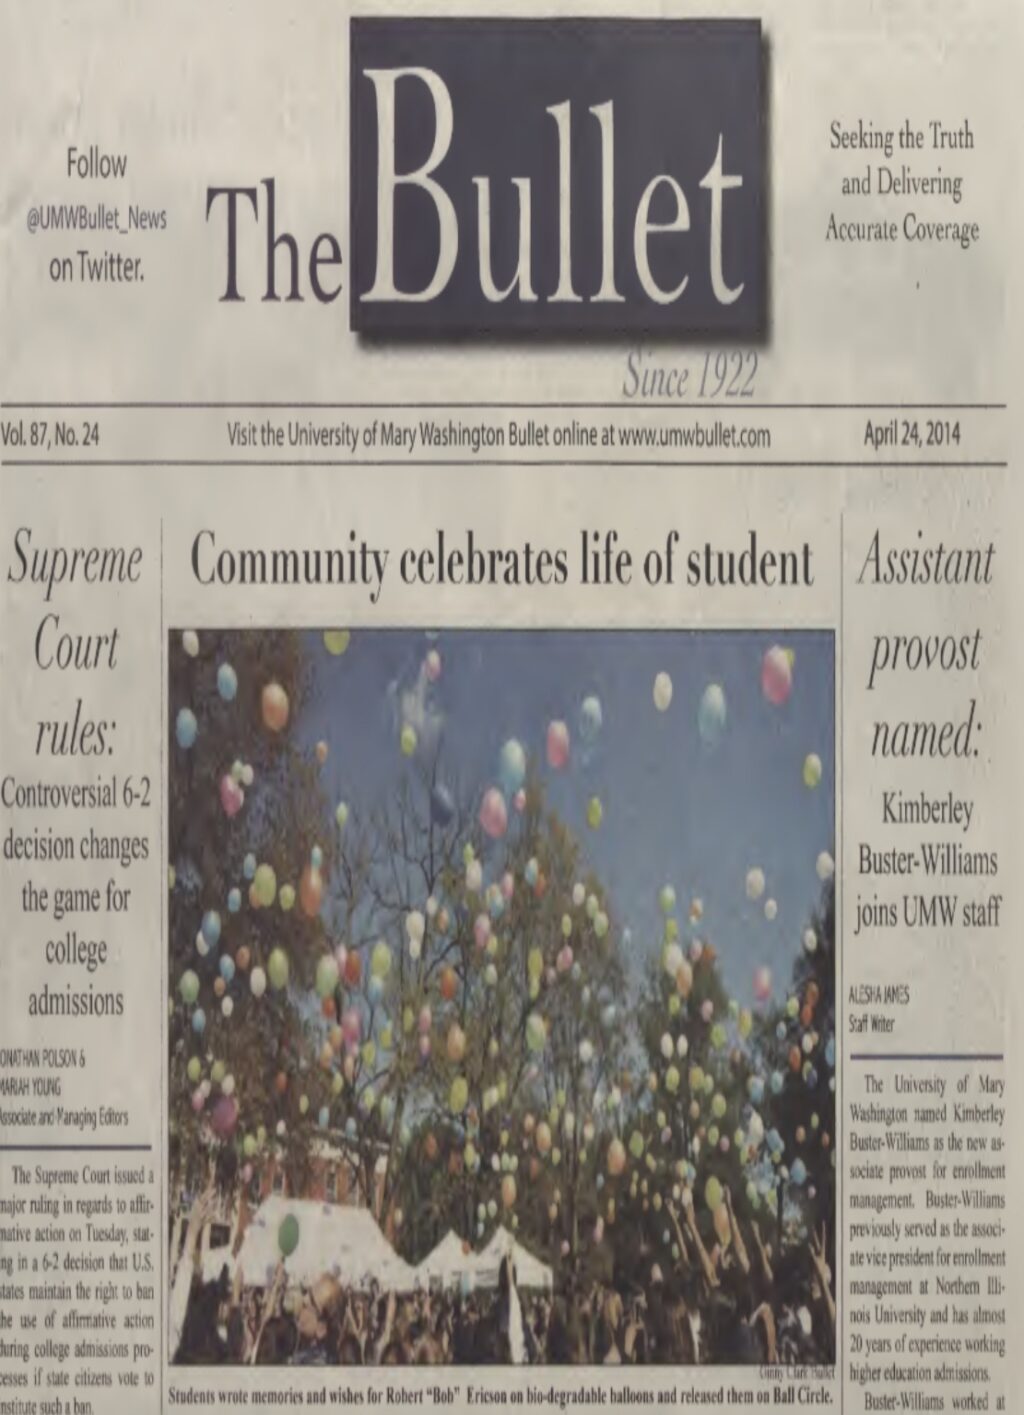 A photo of a newspaper with a front page story celebrating the life of a student.